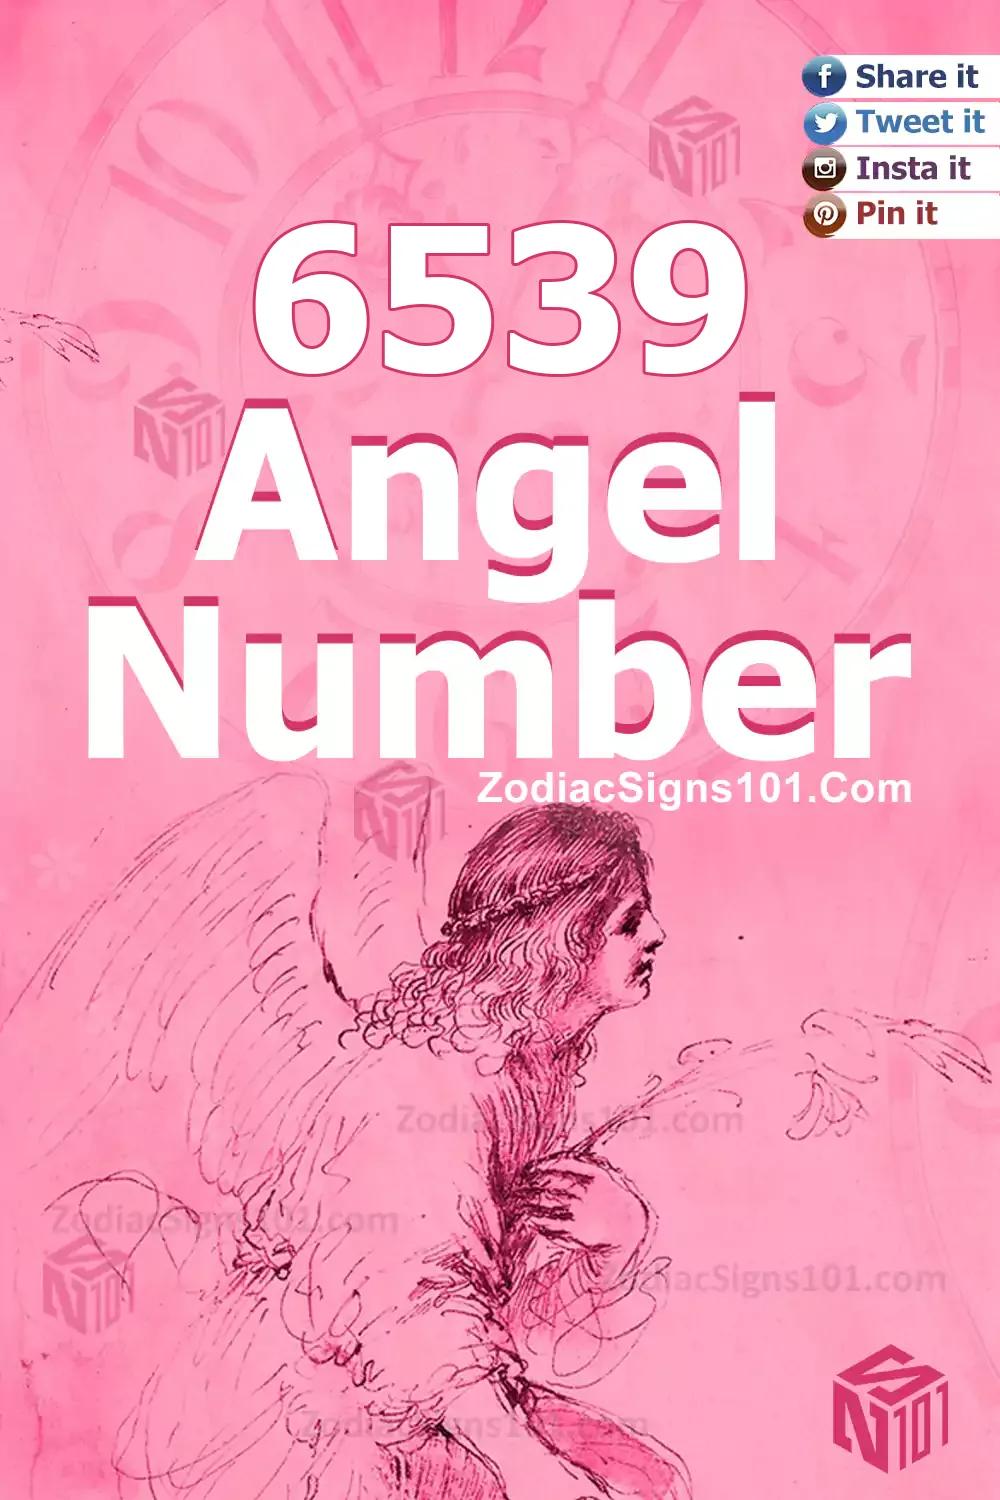 6539 Angel Number Meaning